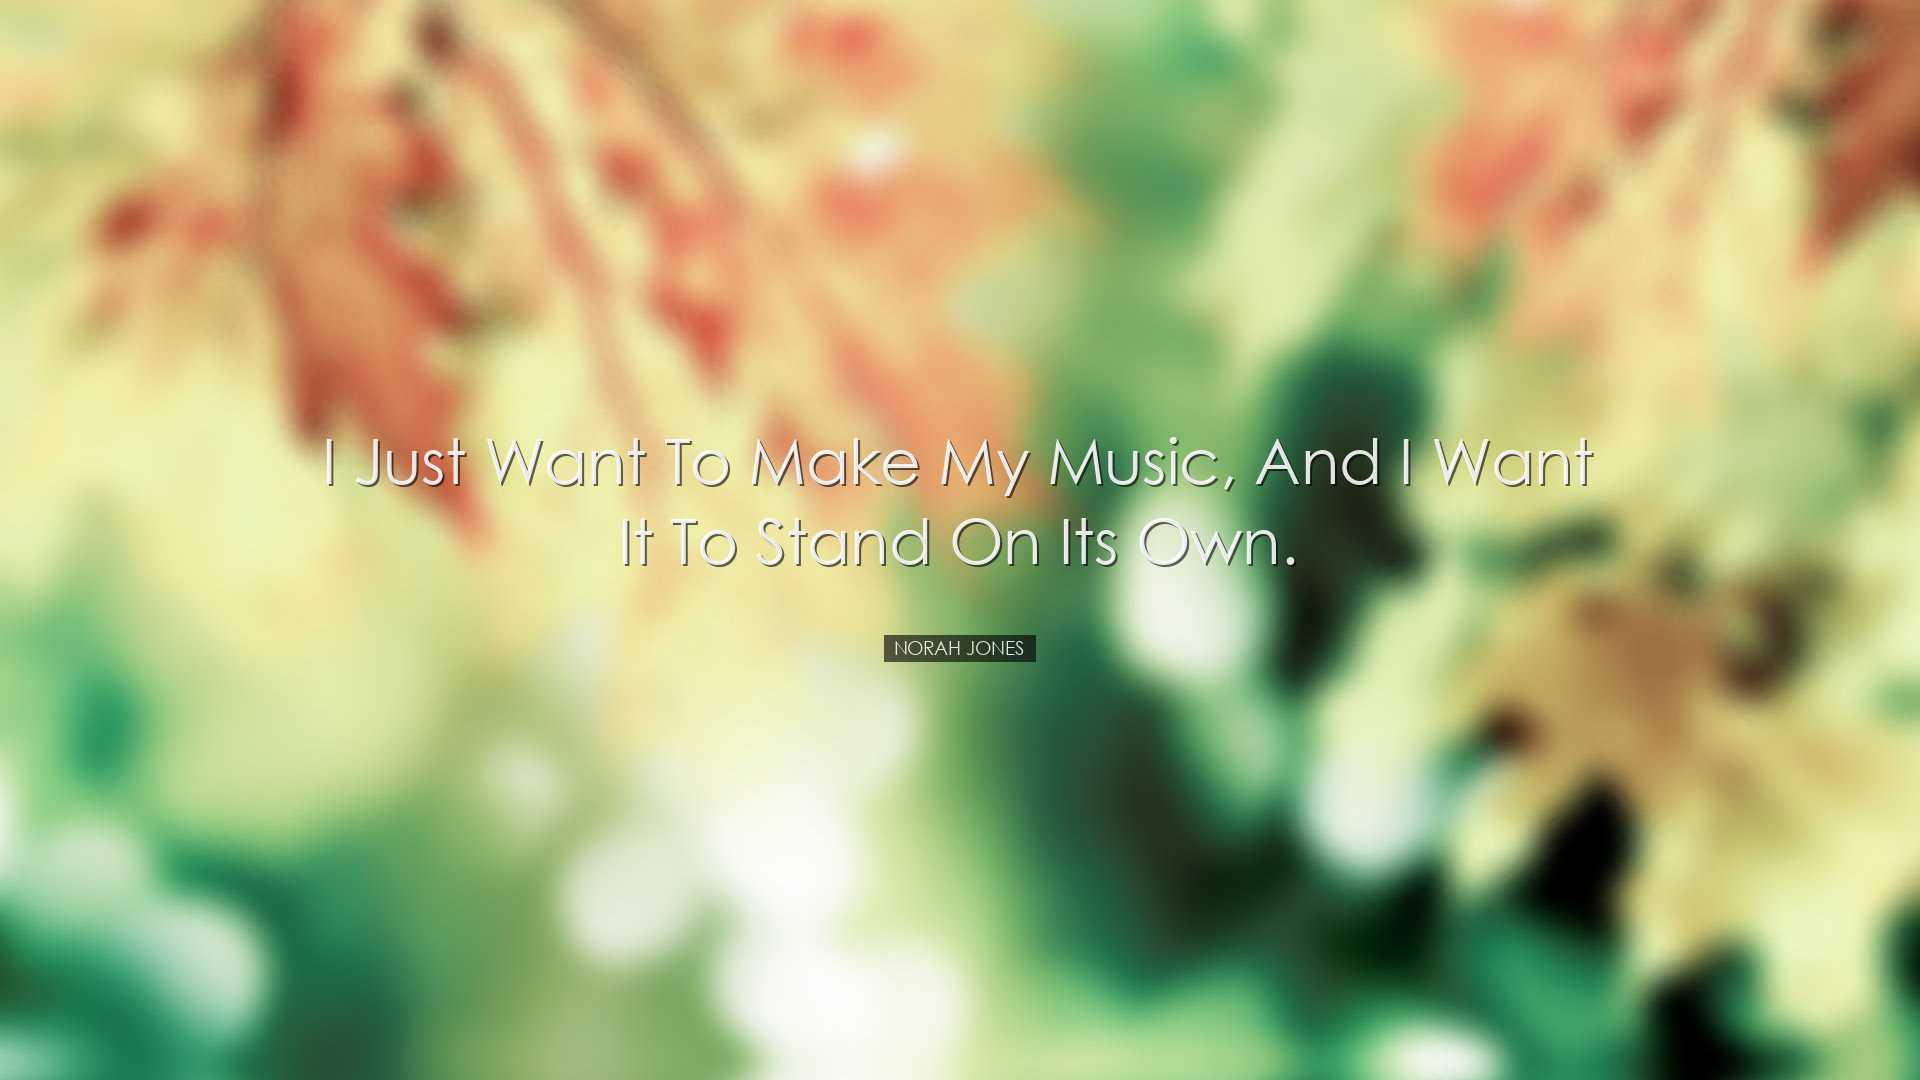 I just want to make my music, and I want it to stand on its own. -